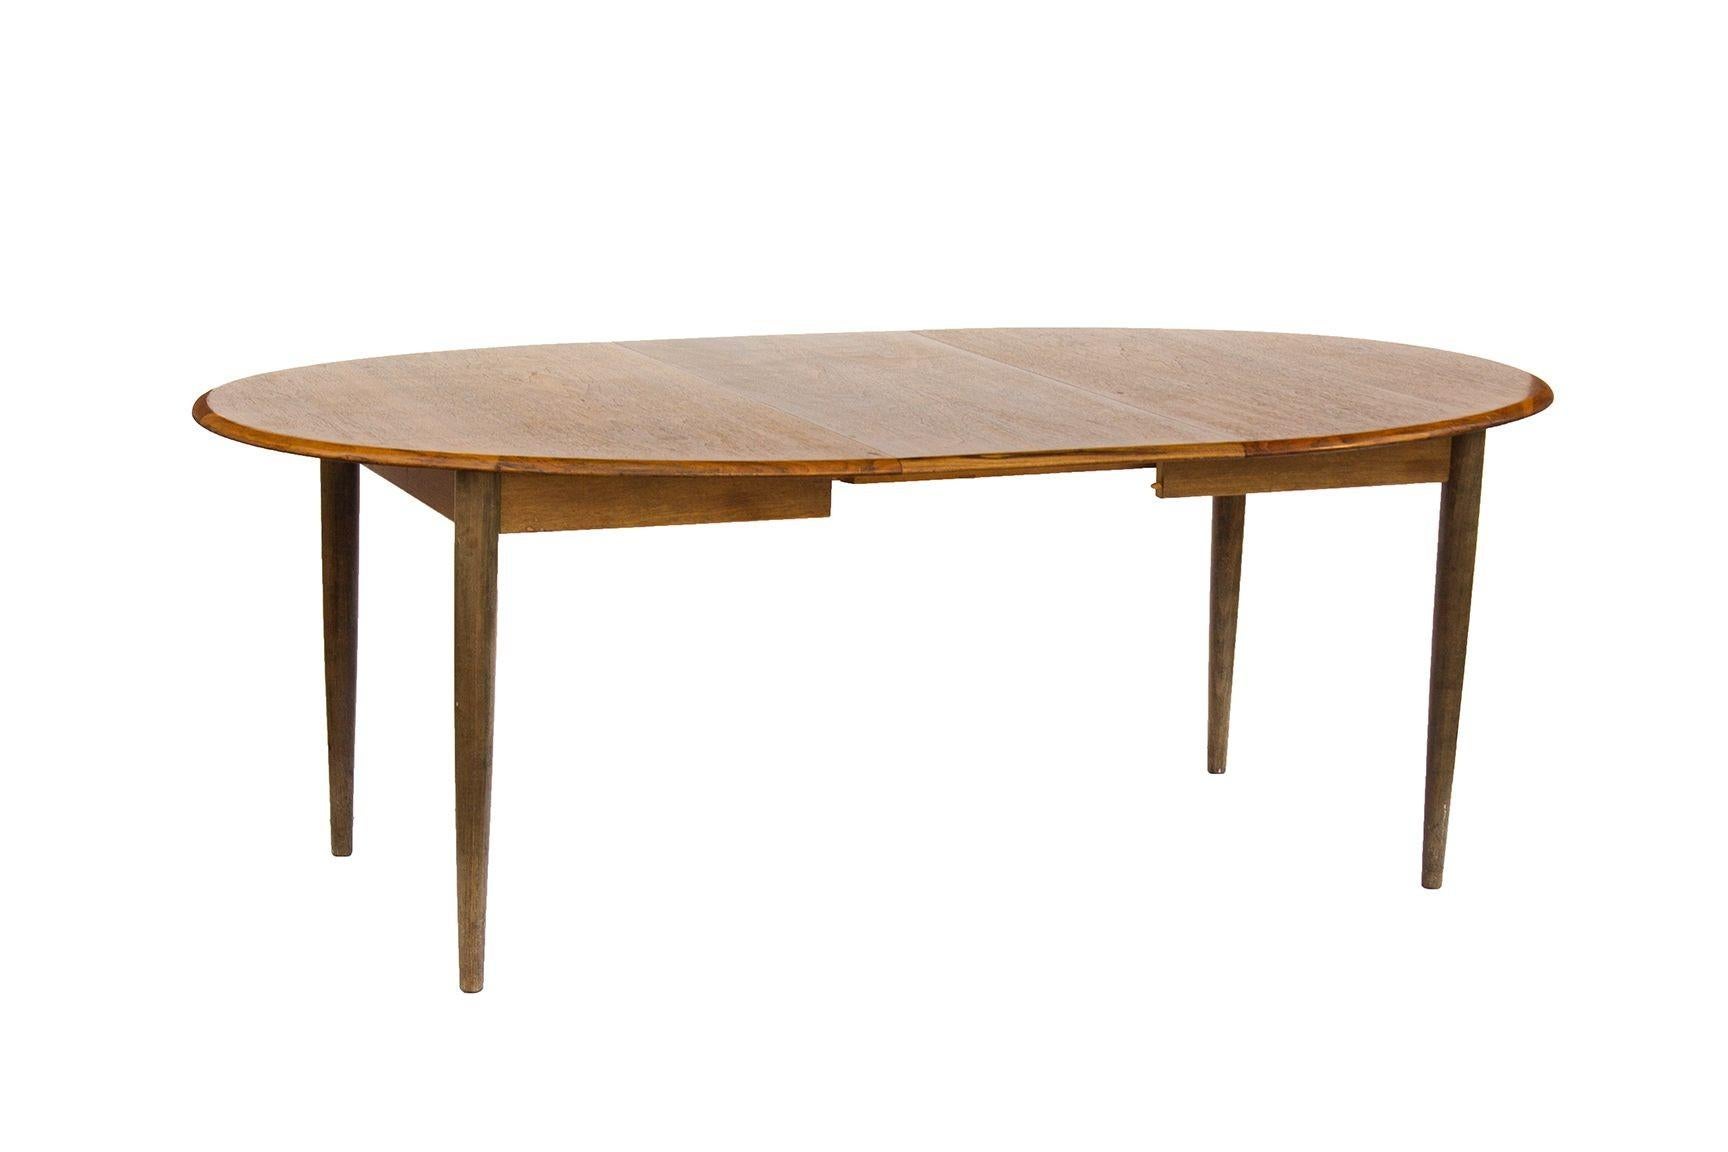 Oval Danish Teak Dining Table with 2 Leaves by Gudme Mobelfabrik 2